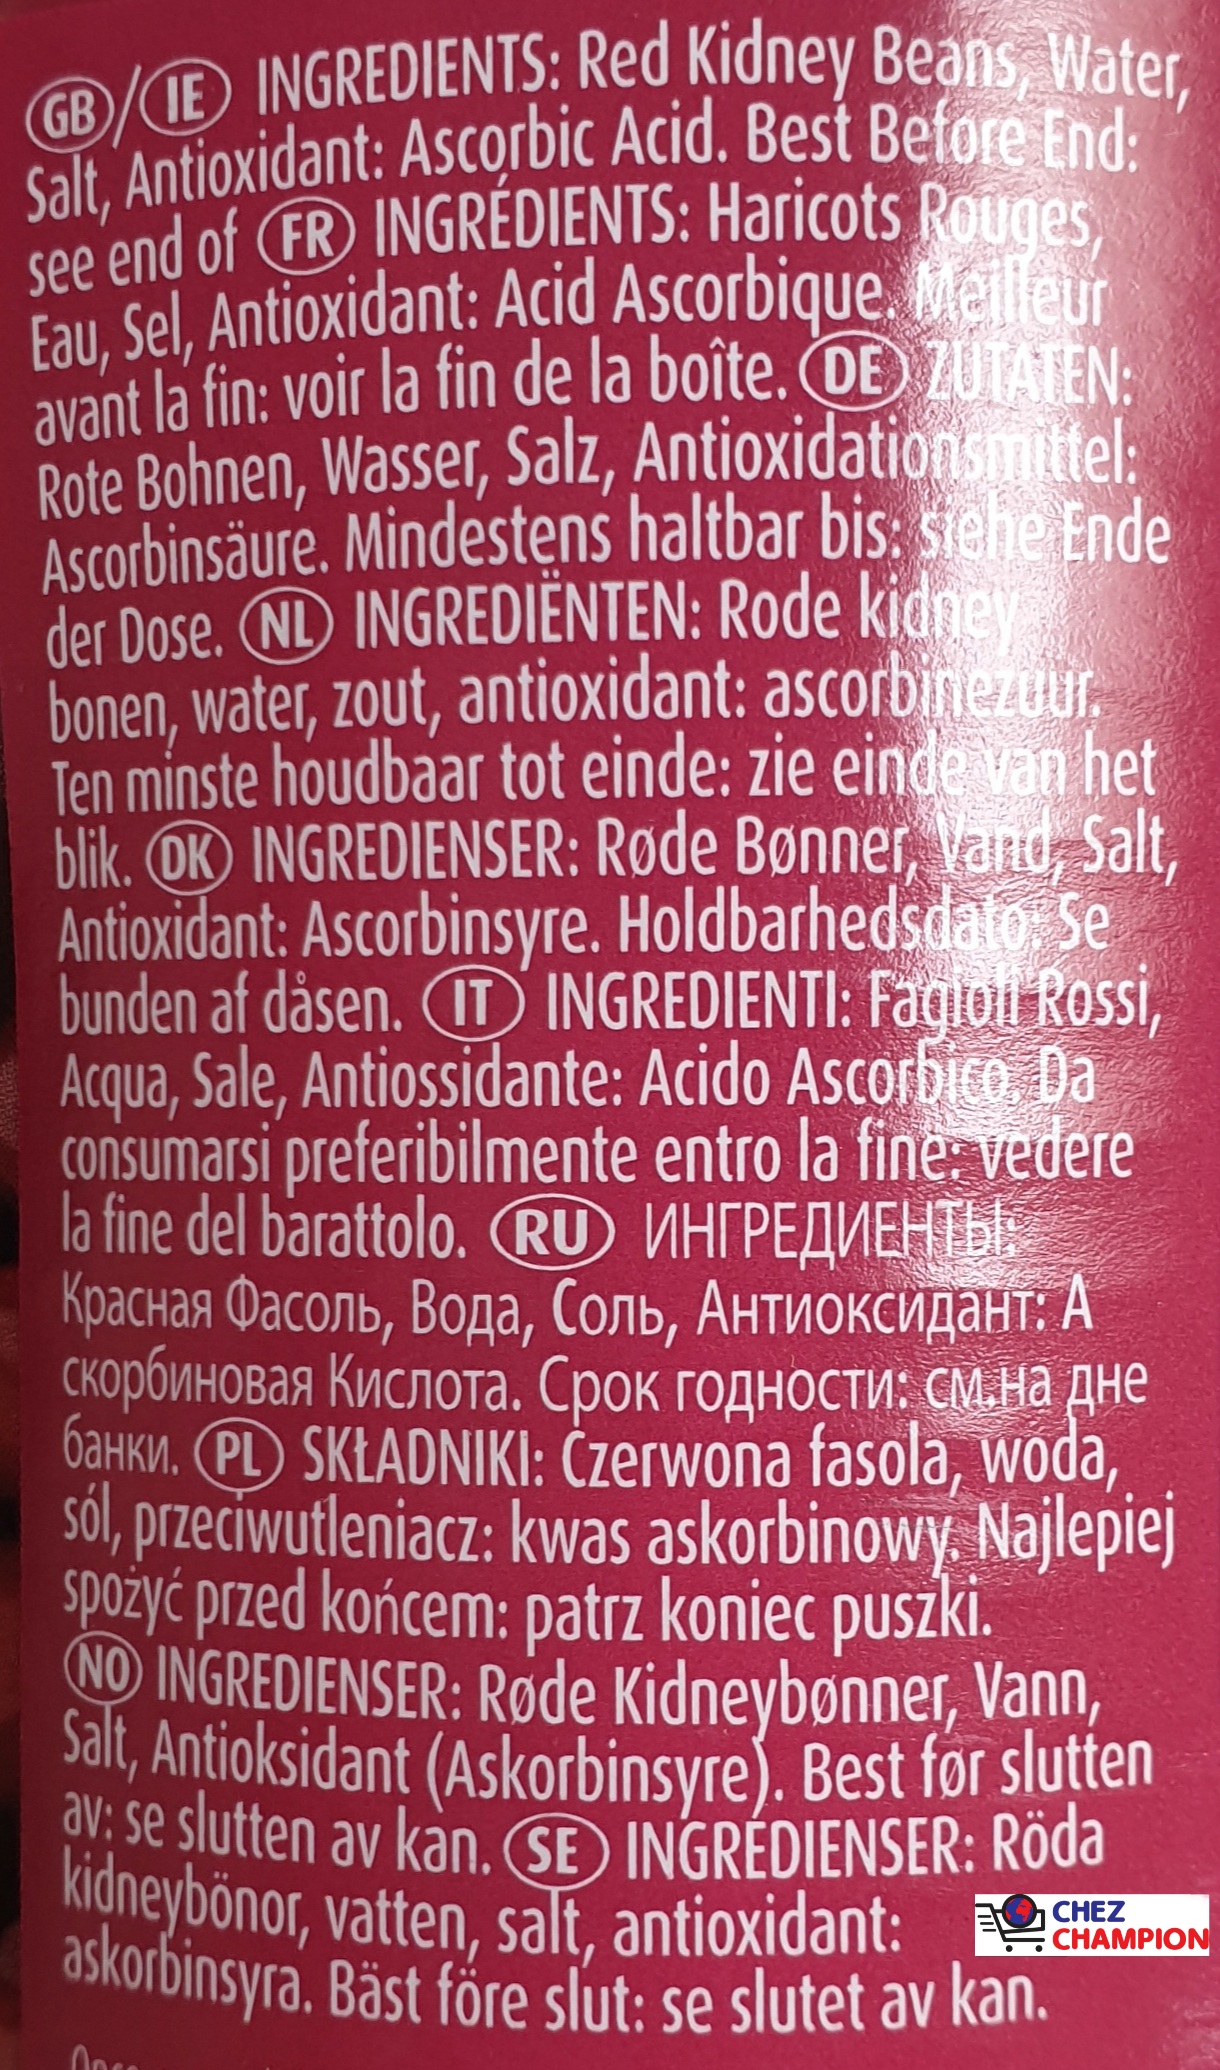 TRS boiled red kidney beans – haricots rouges cuits – rote gekochte kidney Bohnen – 400g